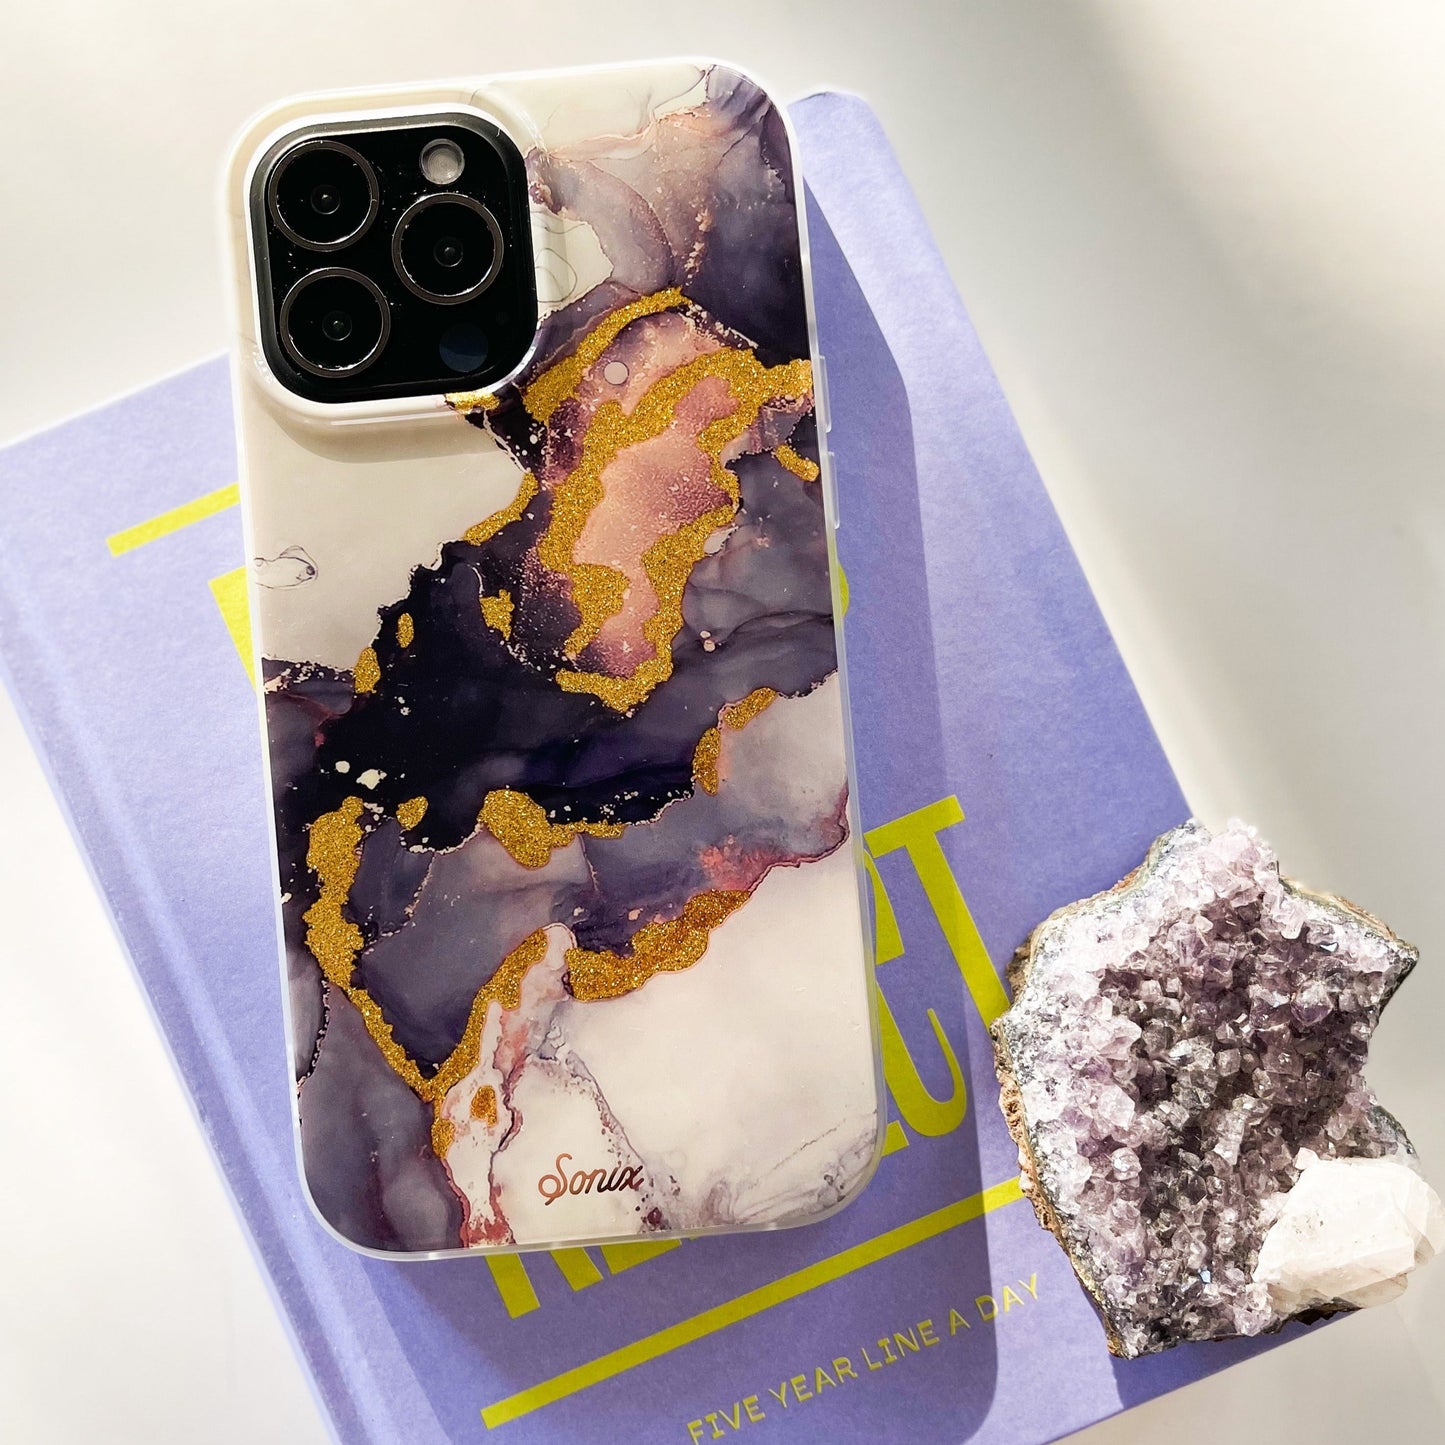 an intergalactic purple and dark colored design with gold glitter to bring out-of-this-world elements shown on an iphone 12 lying on a purple book with an amethyst crystal next to it